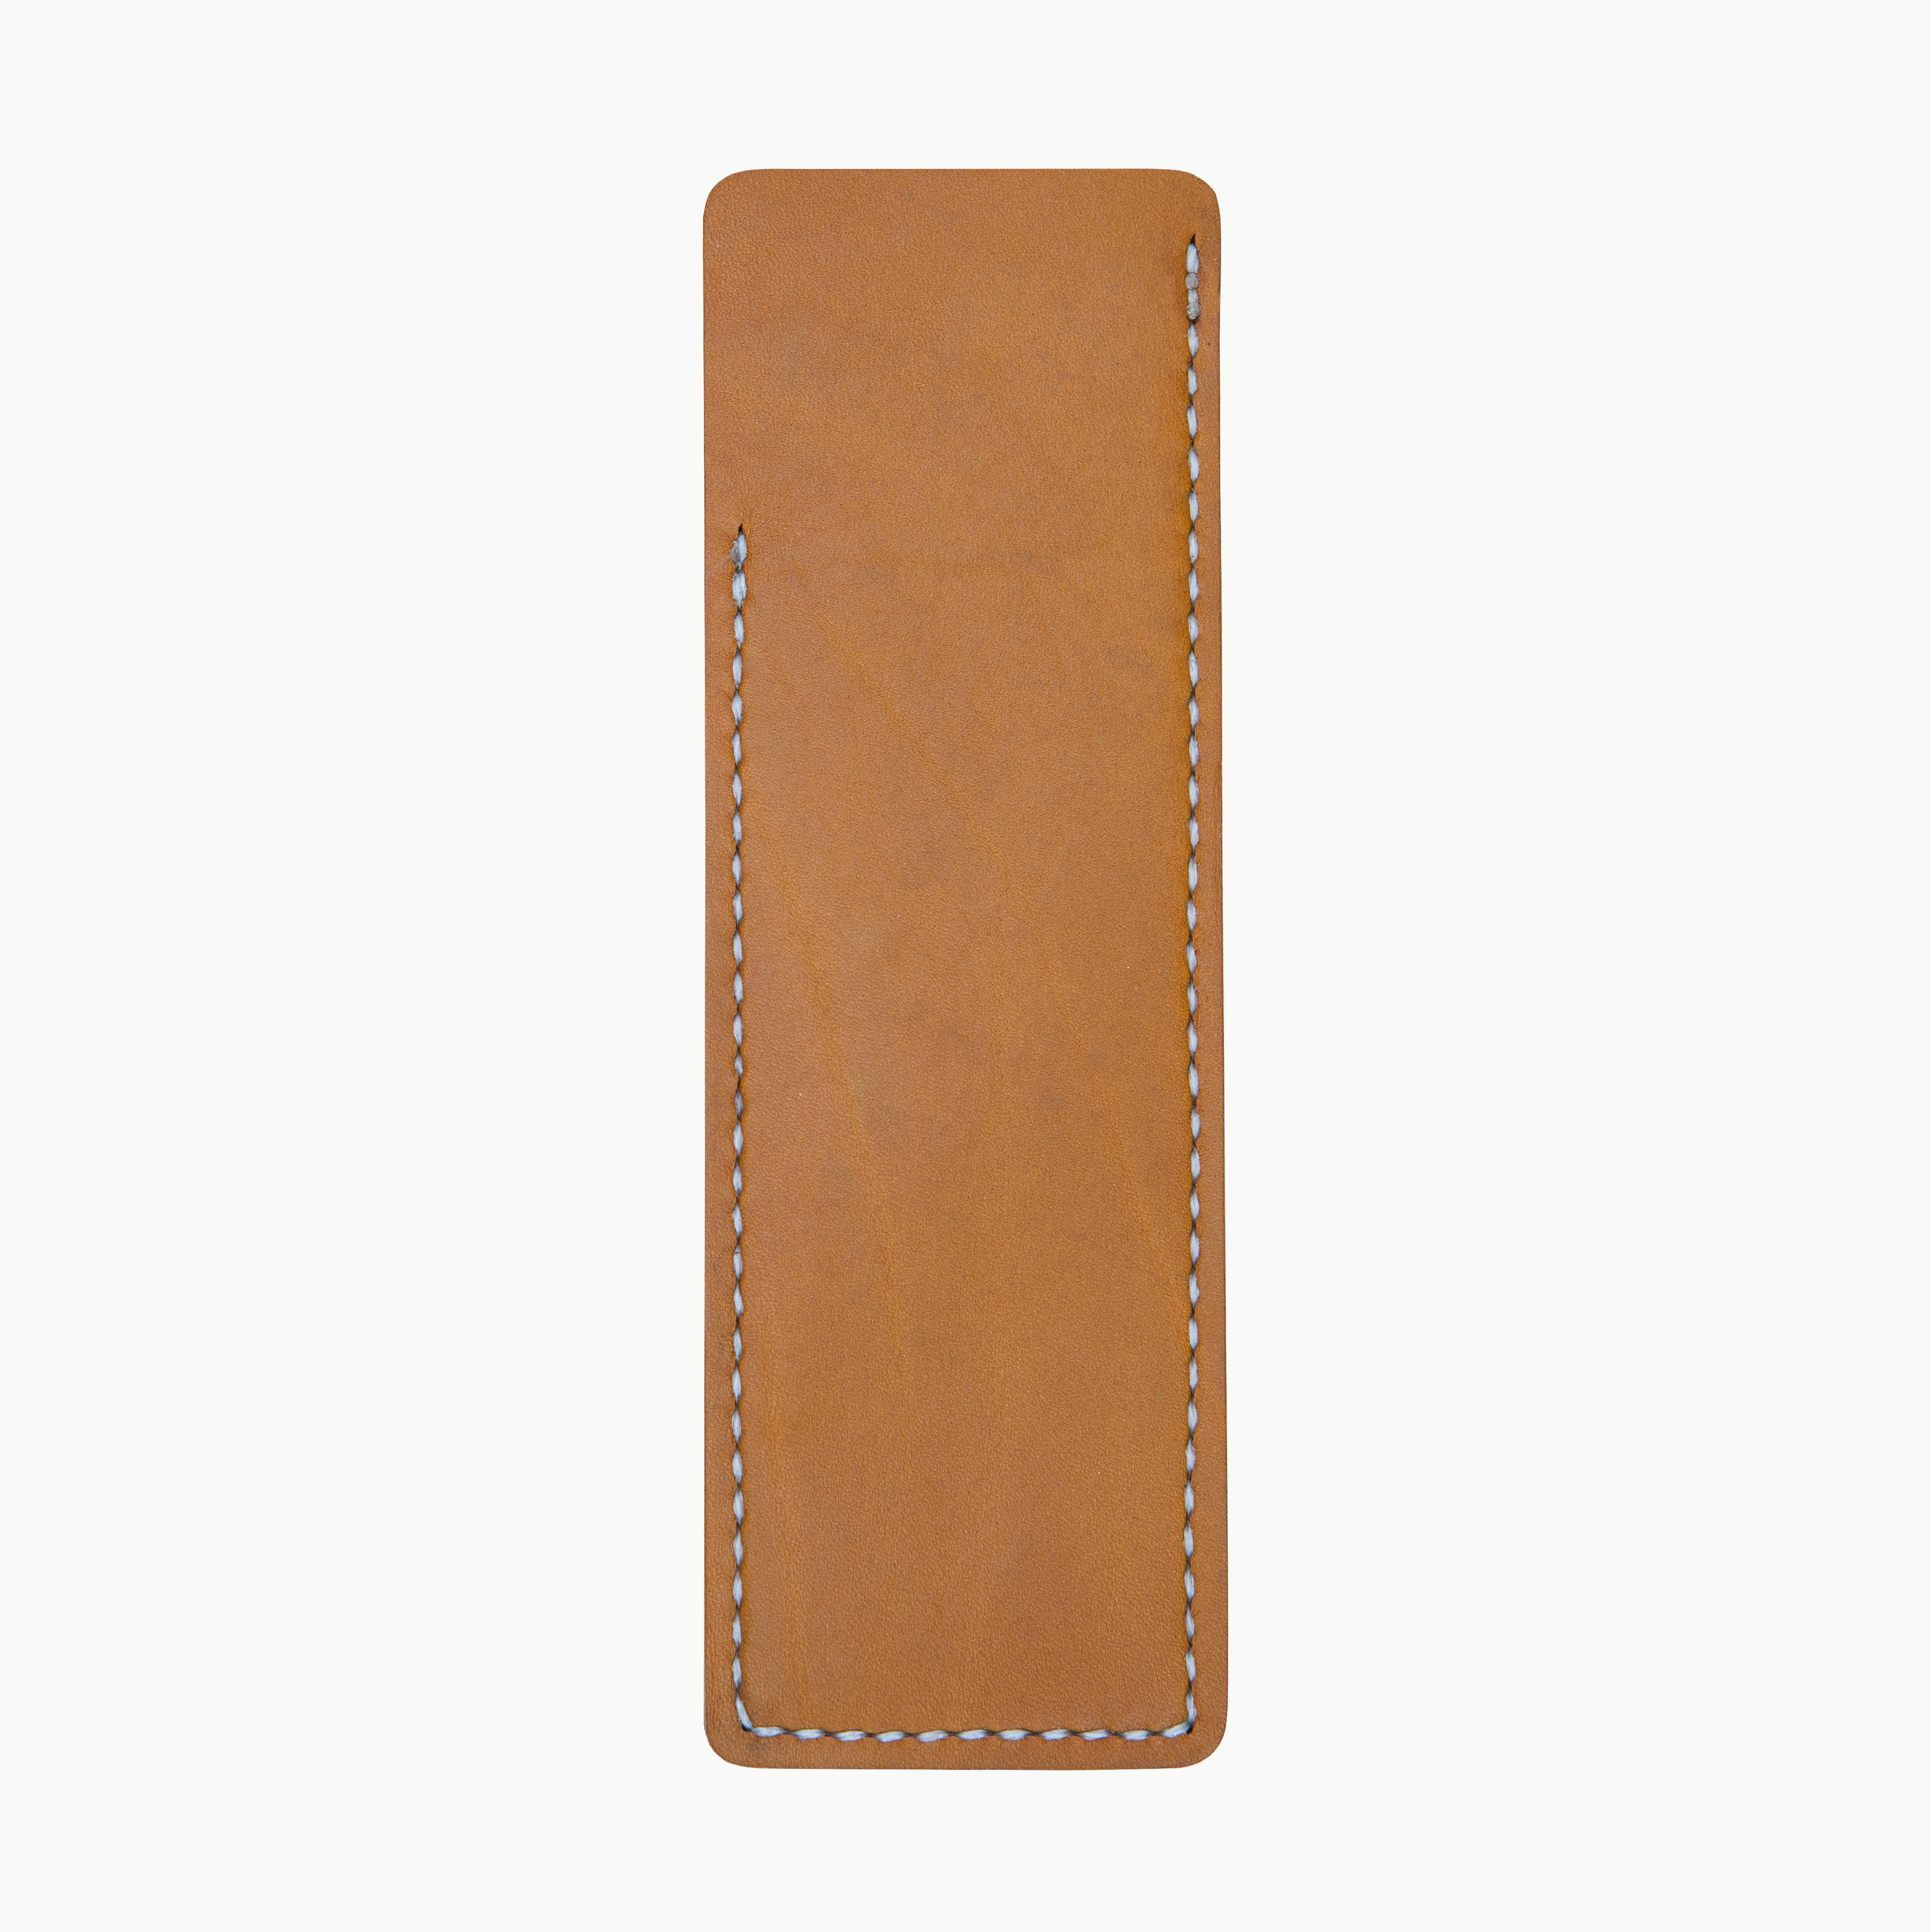 Comb Sleeve lite tan leather